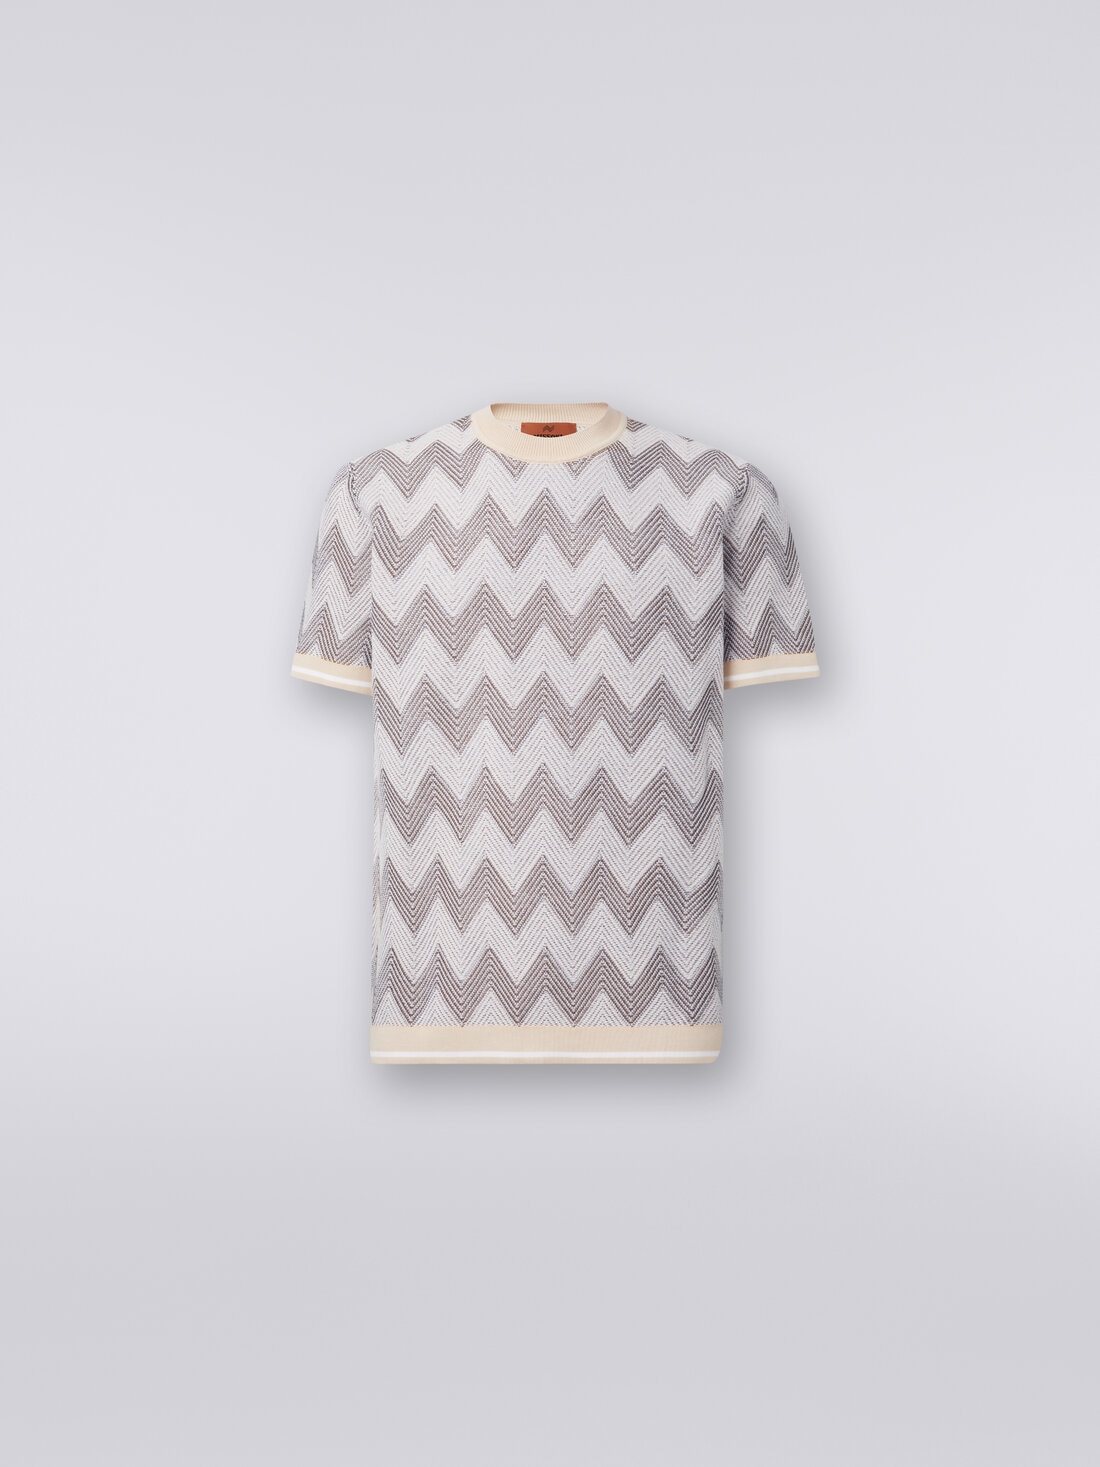 T-shirt in chevron cotton knit with contrasting trim, Multicoloured  - US24SL0HBK034YS80BX - 0